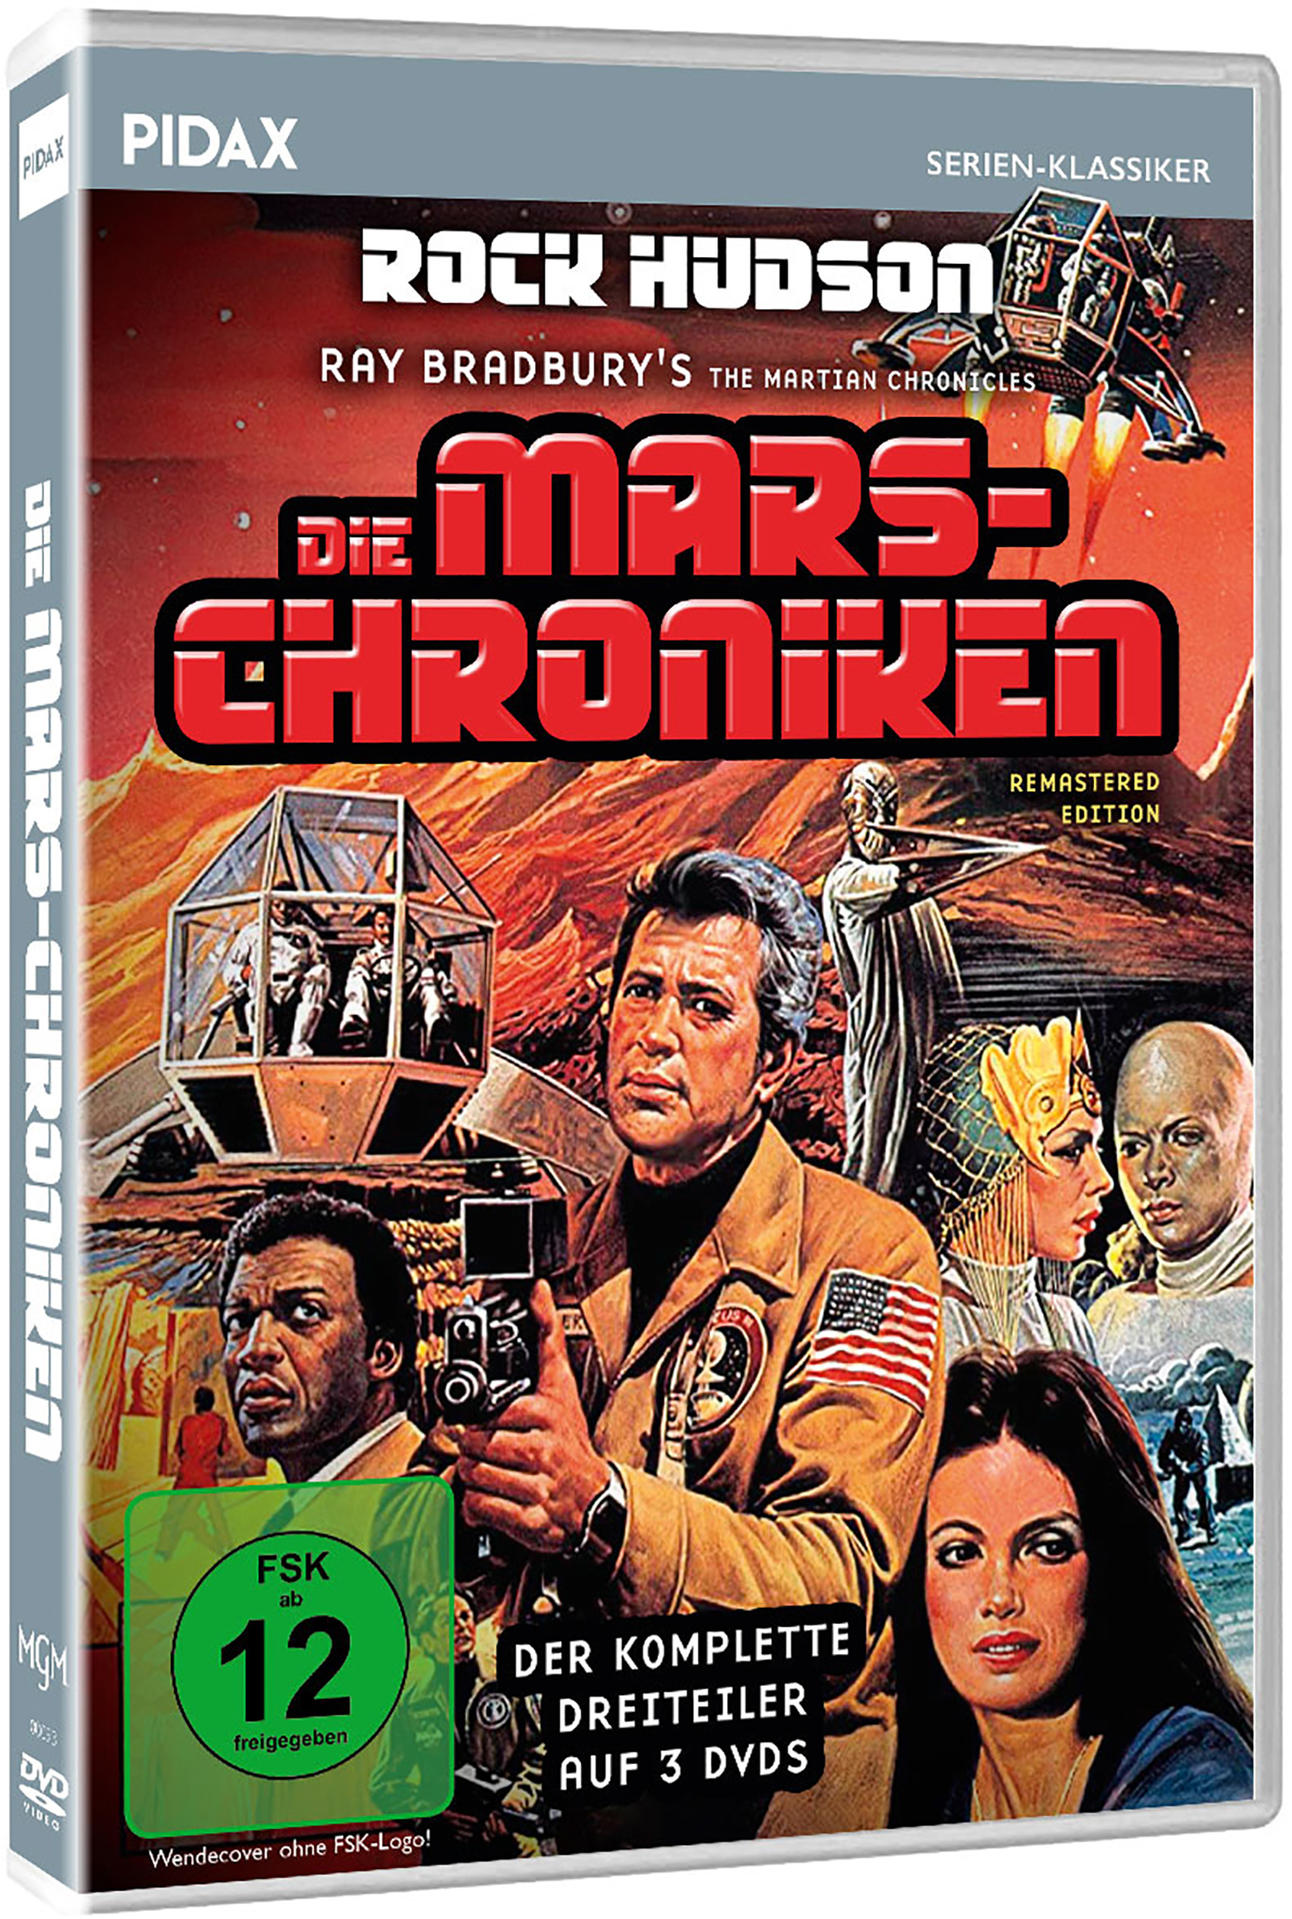 Die Mars-Chroniken (The Martian Chronicles) Edition - DVD Remastered